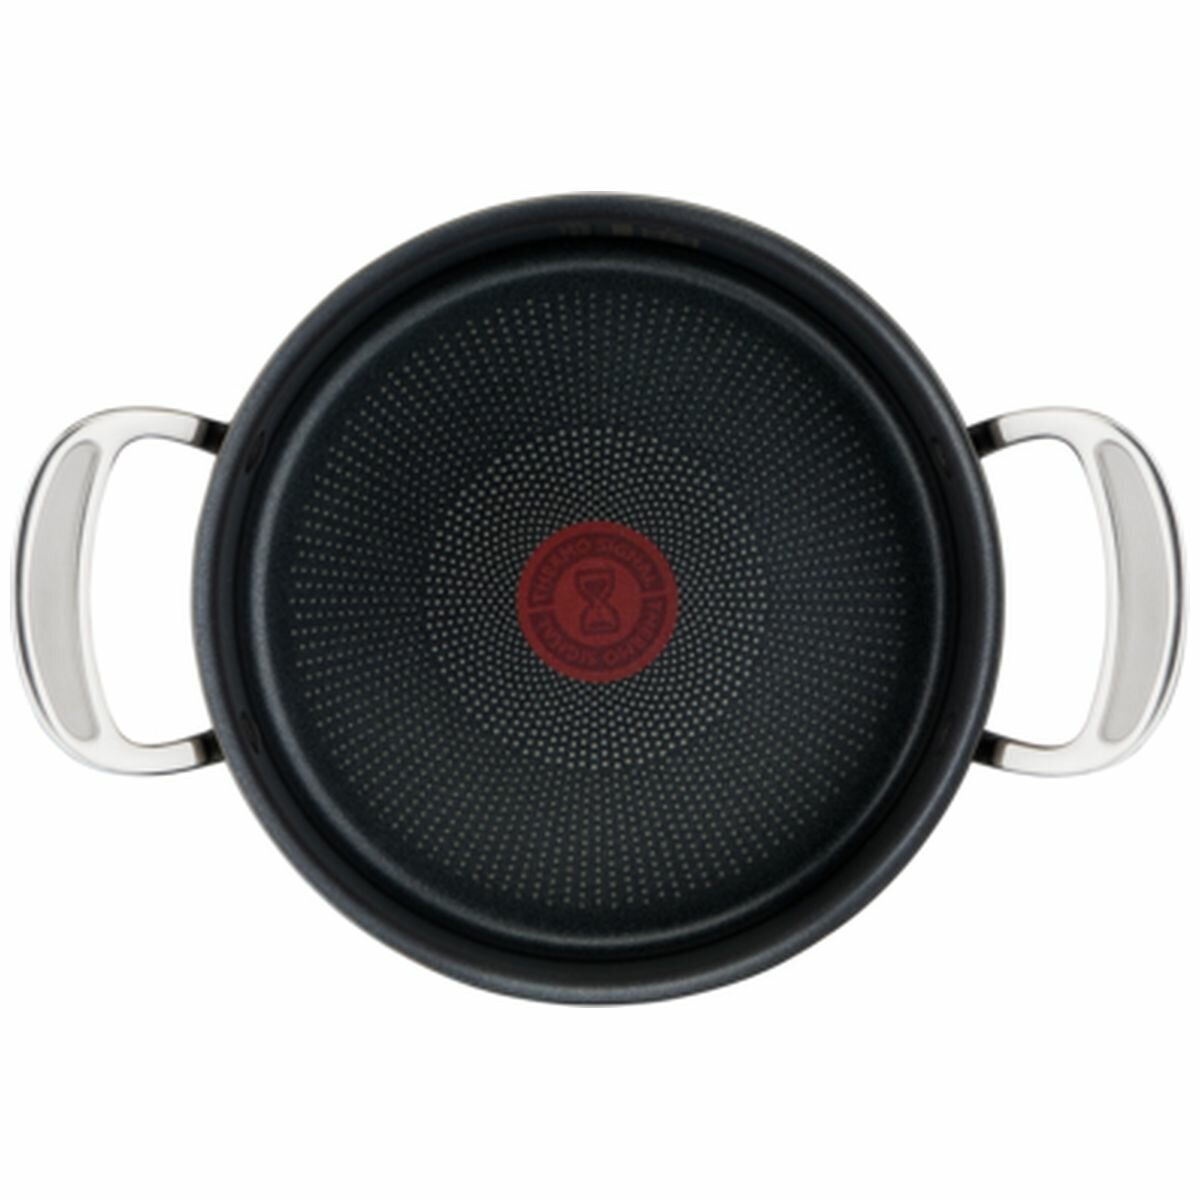 https://www.winnings.com.au/ak/b/a/3/8/ba3874d009f499ae00fc75266e0164a4160a71e5_tefal_jamie_oliver_cooks_classics_induction_non_stick_hard_anodised_5_piece_cookware_set_h912s5-high.jpeg